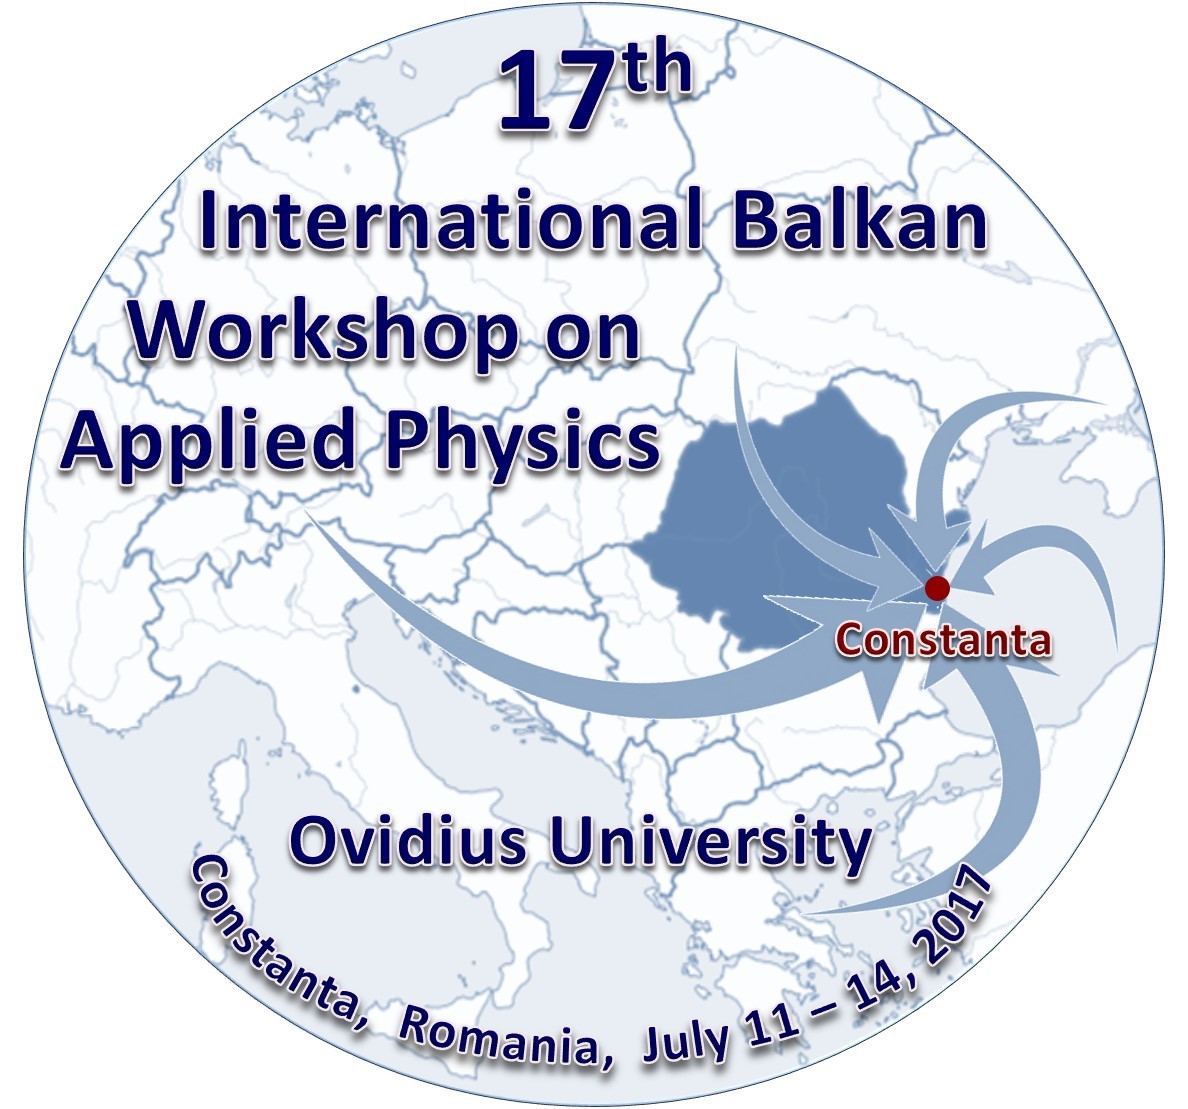   The 17th International Balkan Workshop on Applied Physics and Materials Science aims to bring together leading academic scientists, researchers and scholars to exchange and share their experiences and research results about all aspects of Applied Physics and discuss the practical challenges encountered and the solutions adopted. 